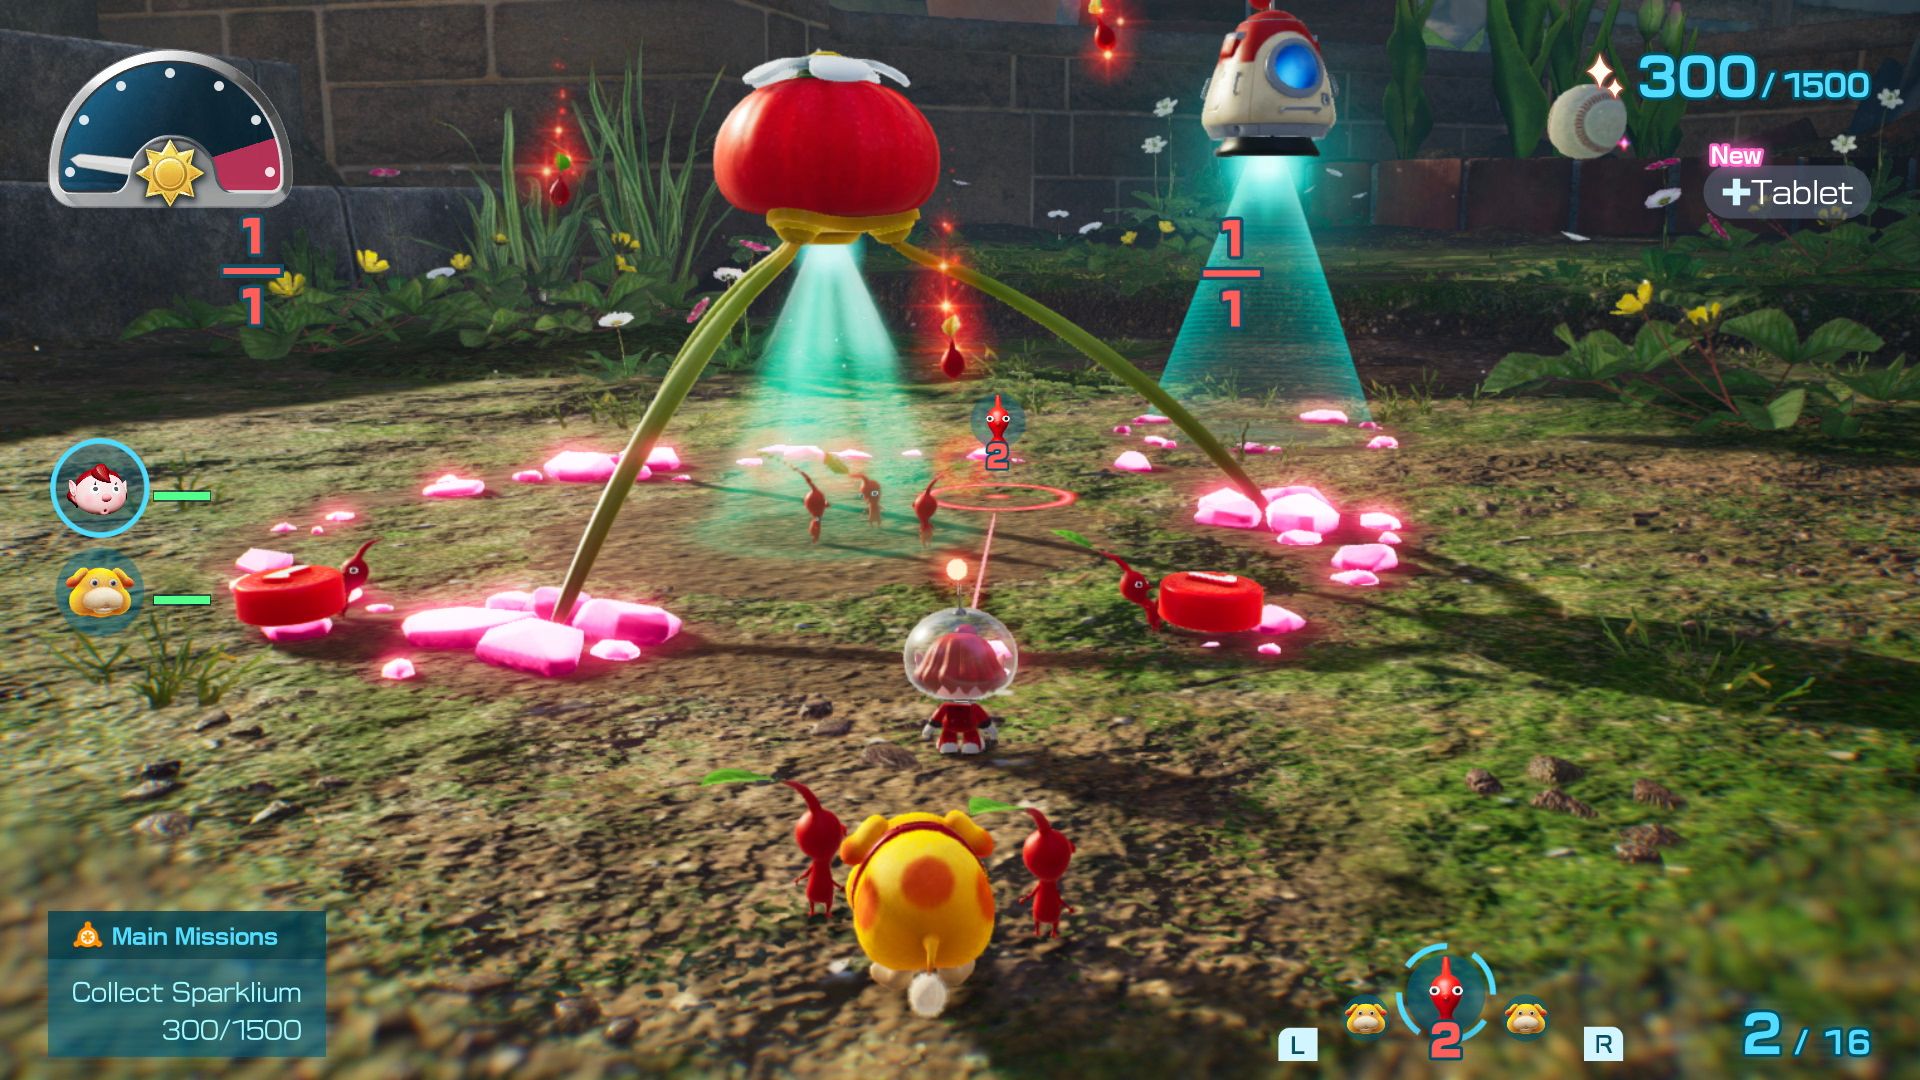 Playing Pikmin 4 just left me wanting to explore more of it, Hands-on  preview